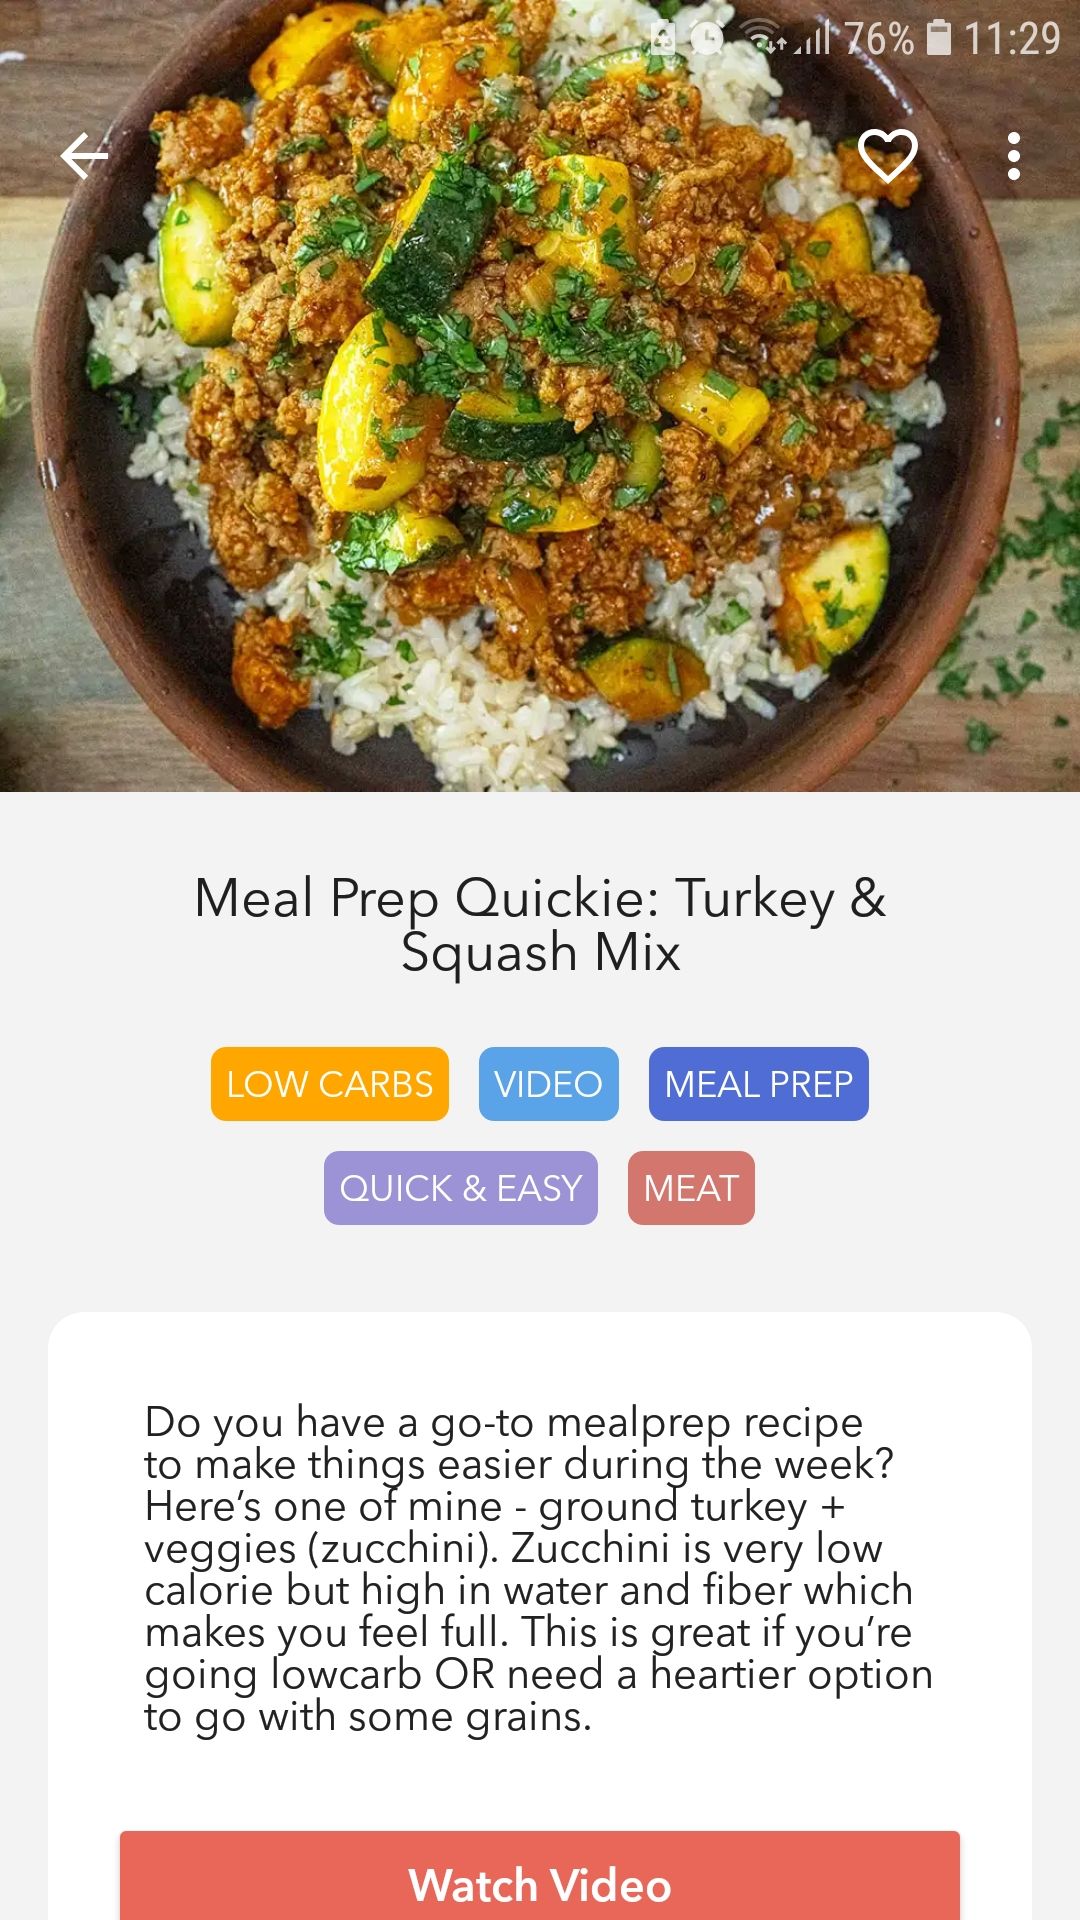 FitMenCook vs. Healthy Recipes: Comparing the Top Android Apps for